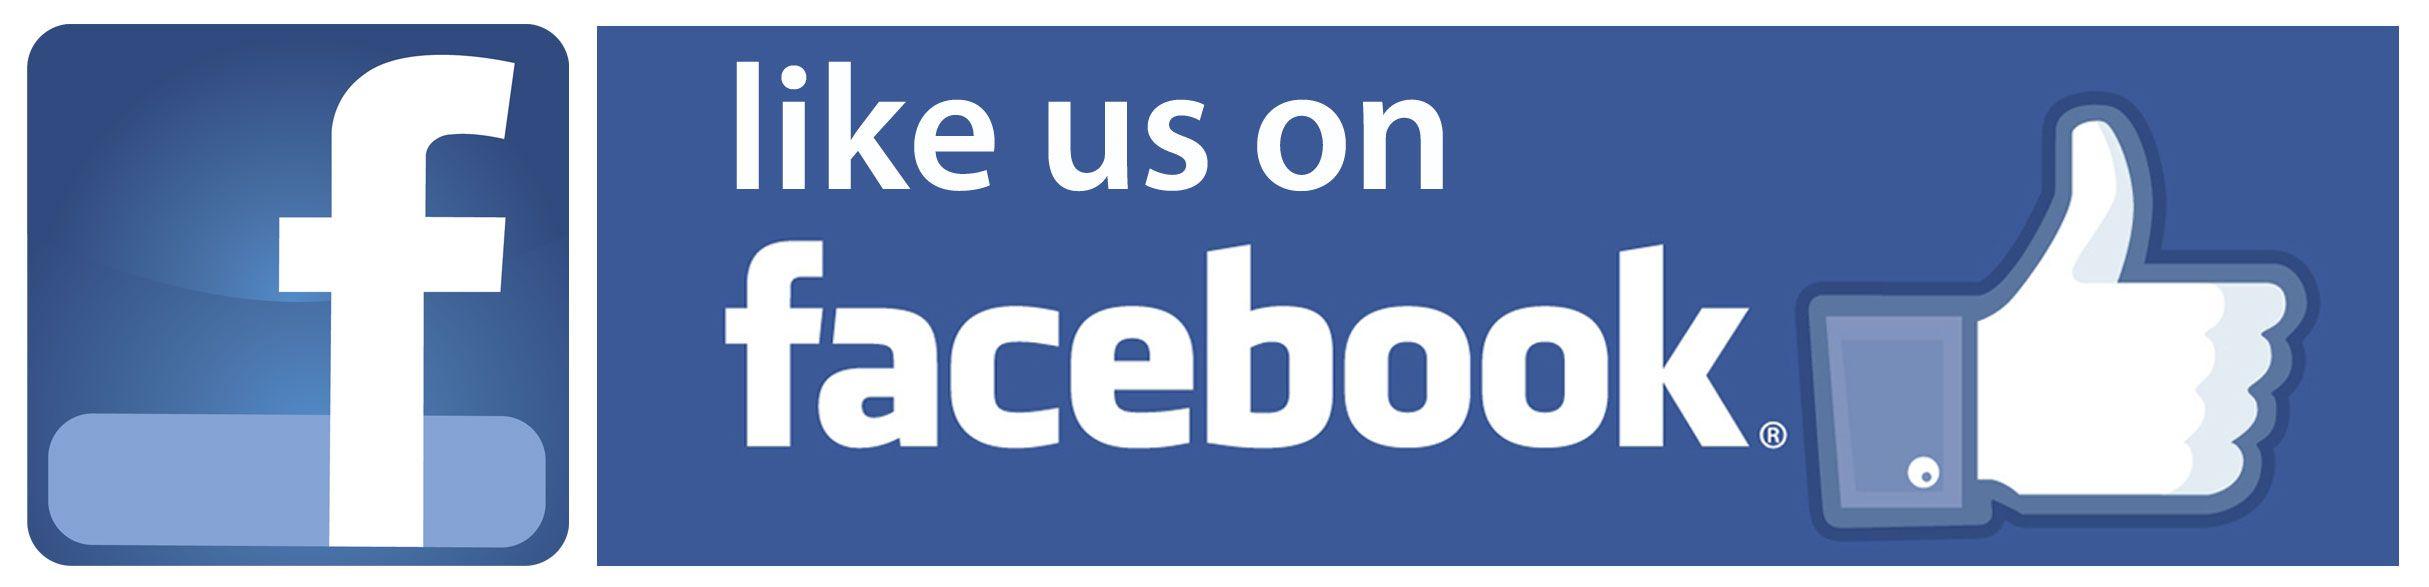 Like Us On Facebook Official Logo - Facebook Logo Transparent PNG Pictures - Free Icons and PNG Backgrounds